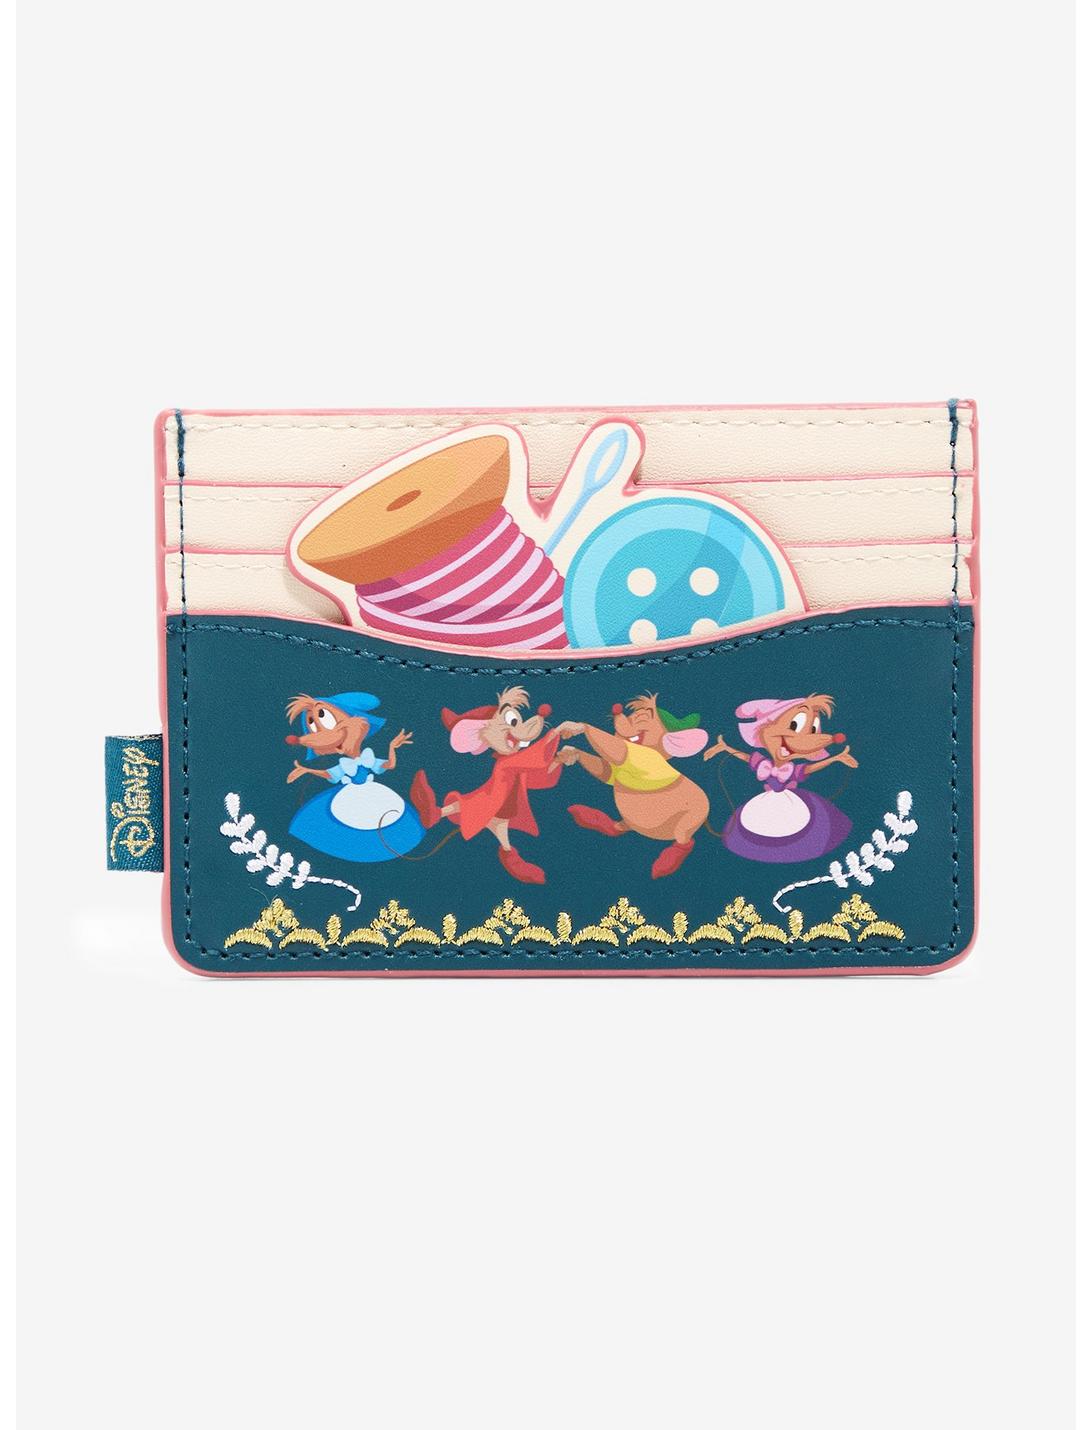 preposition Own Slippery Loungefly Disney Cinderella Storybook Cardholder - BoxLunch Exclusive |  BoxLunch